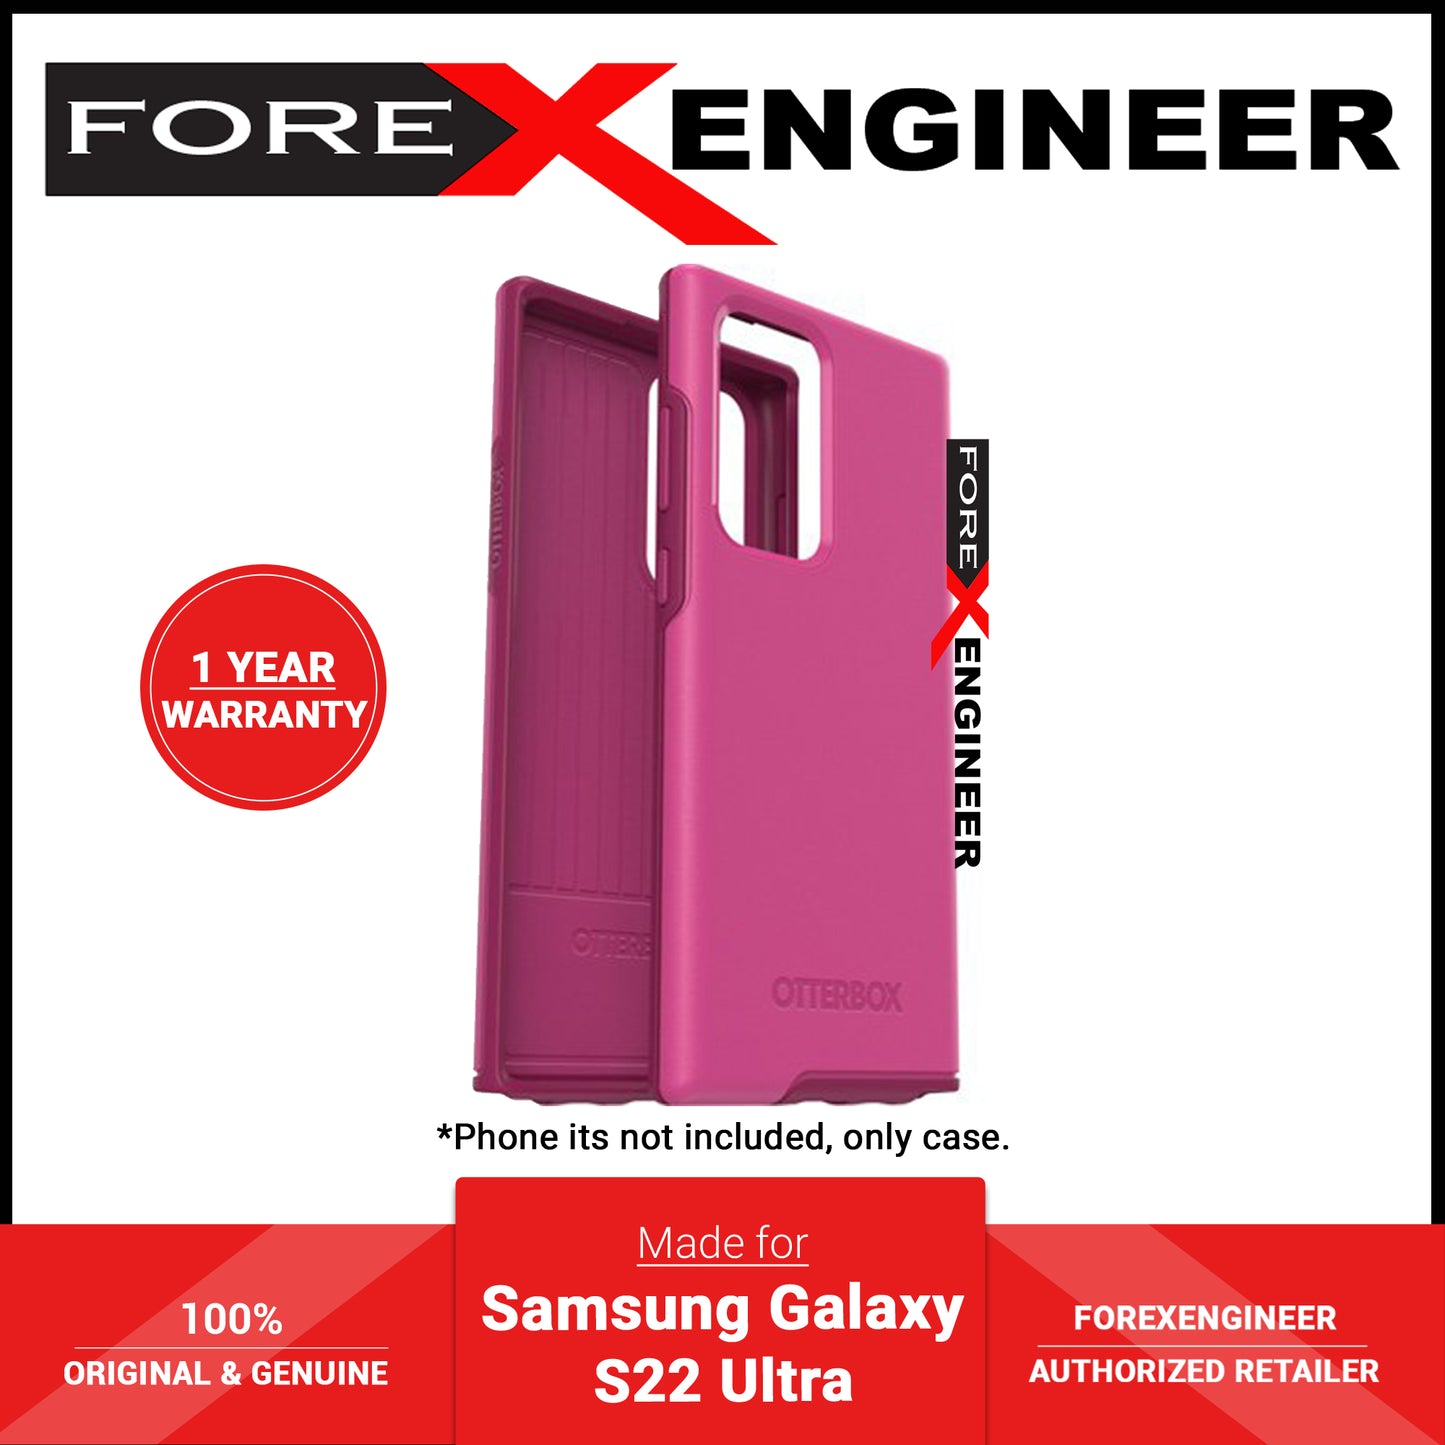 Otterbox Symmetry Series Case for Samsung Galaxy S22 Ultra - Renaissance Pink (Barcode: 840104295984 )